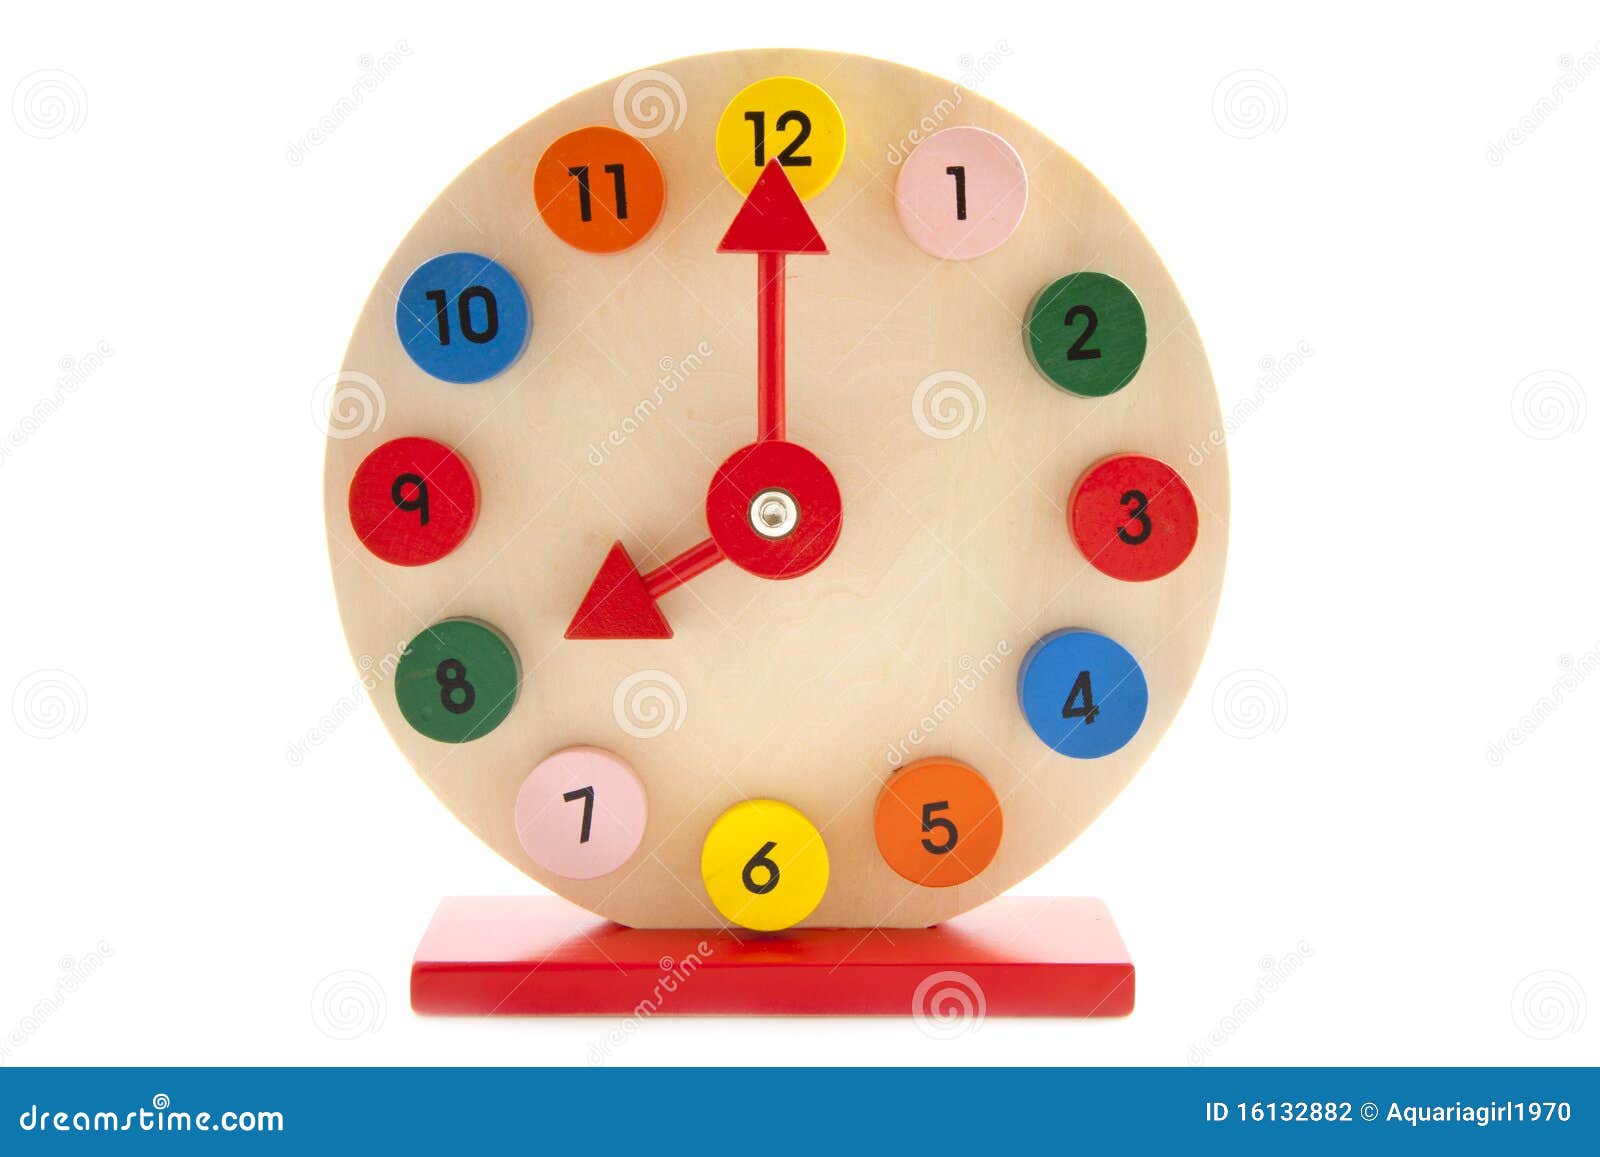 Colorful wooden clock isolated on a white background.